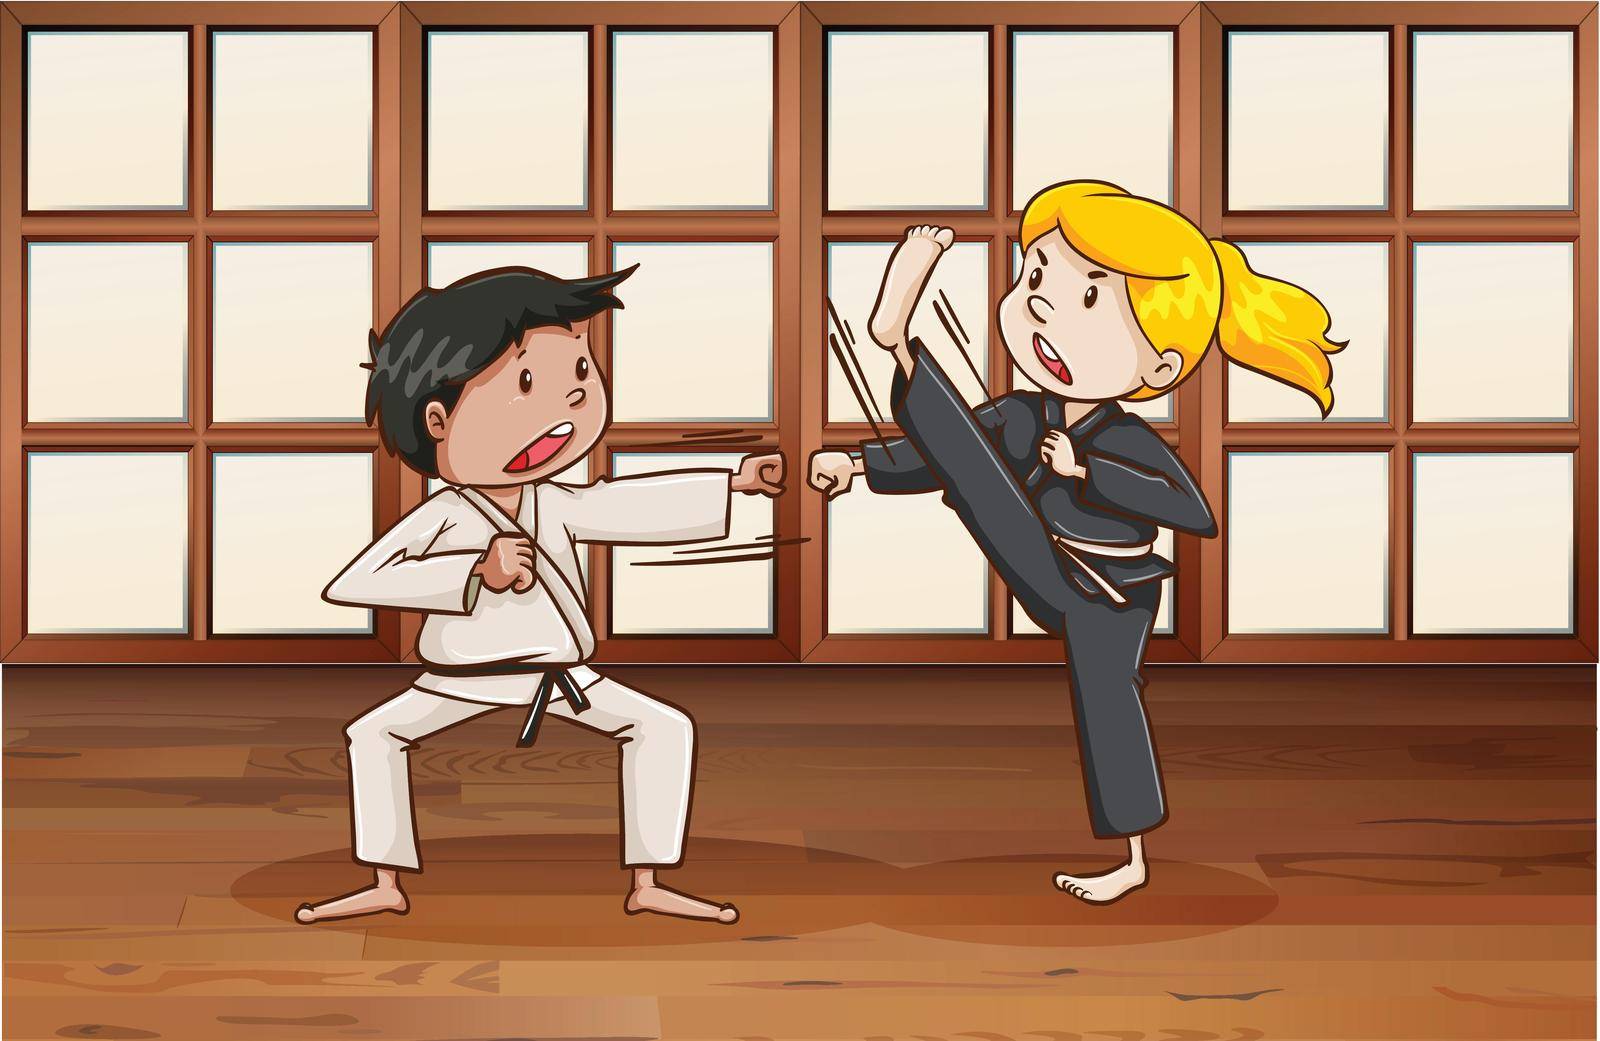 Man and woman practice martial arts in the room